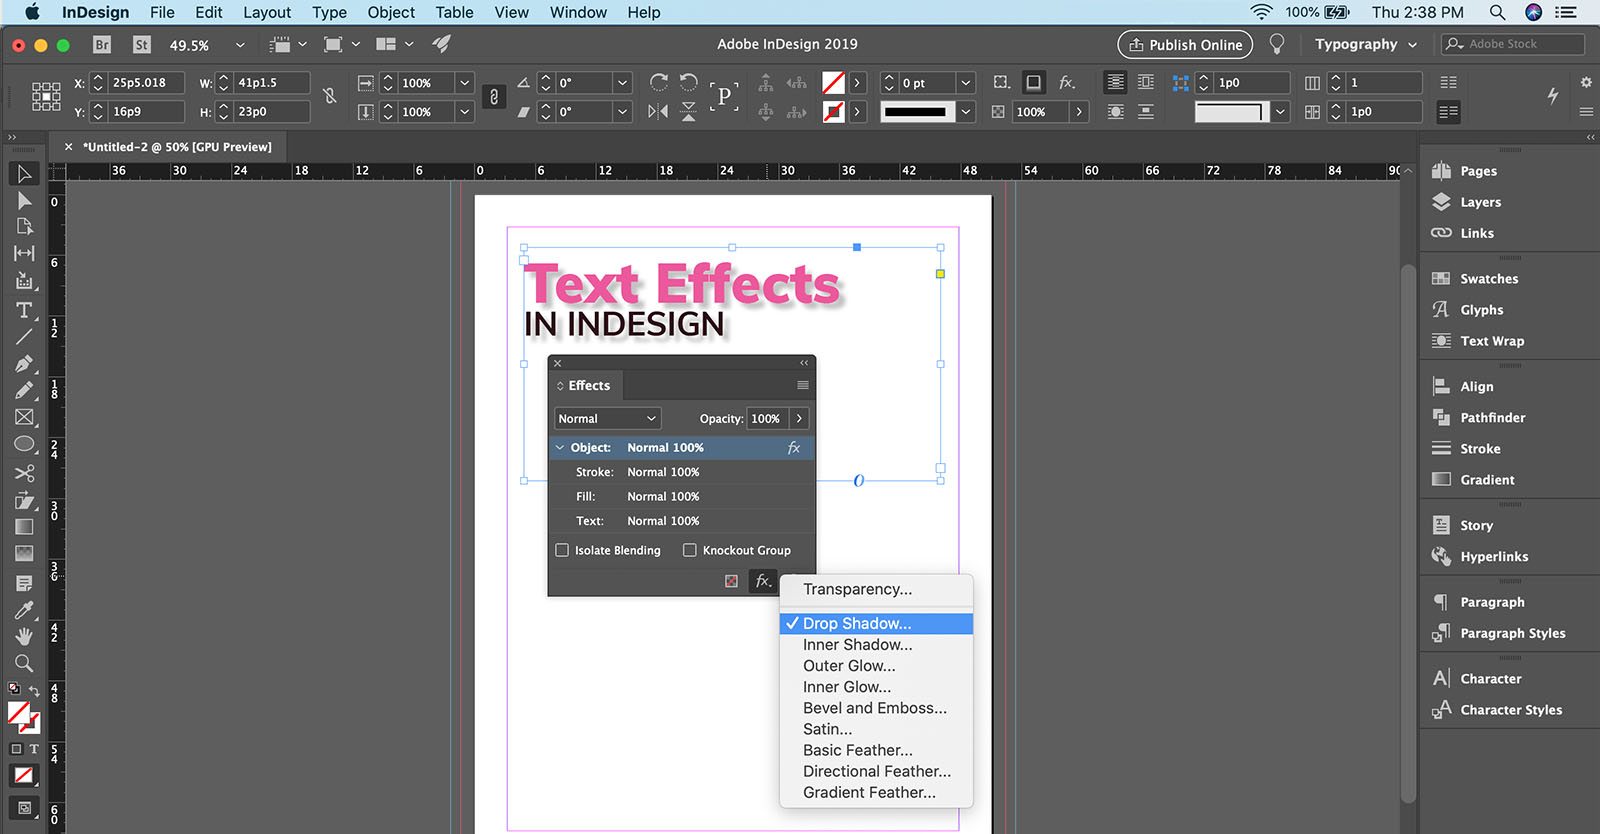 How to add text effects in InDesign